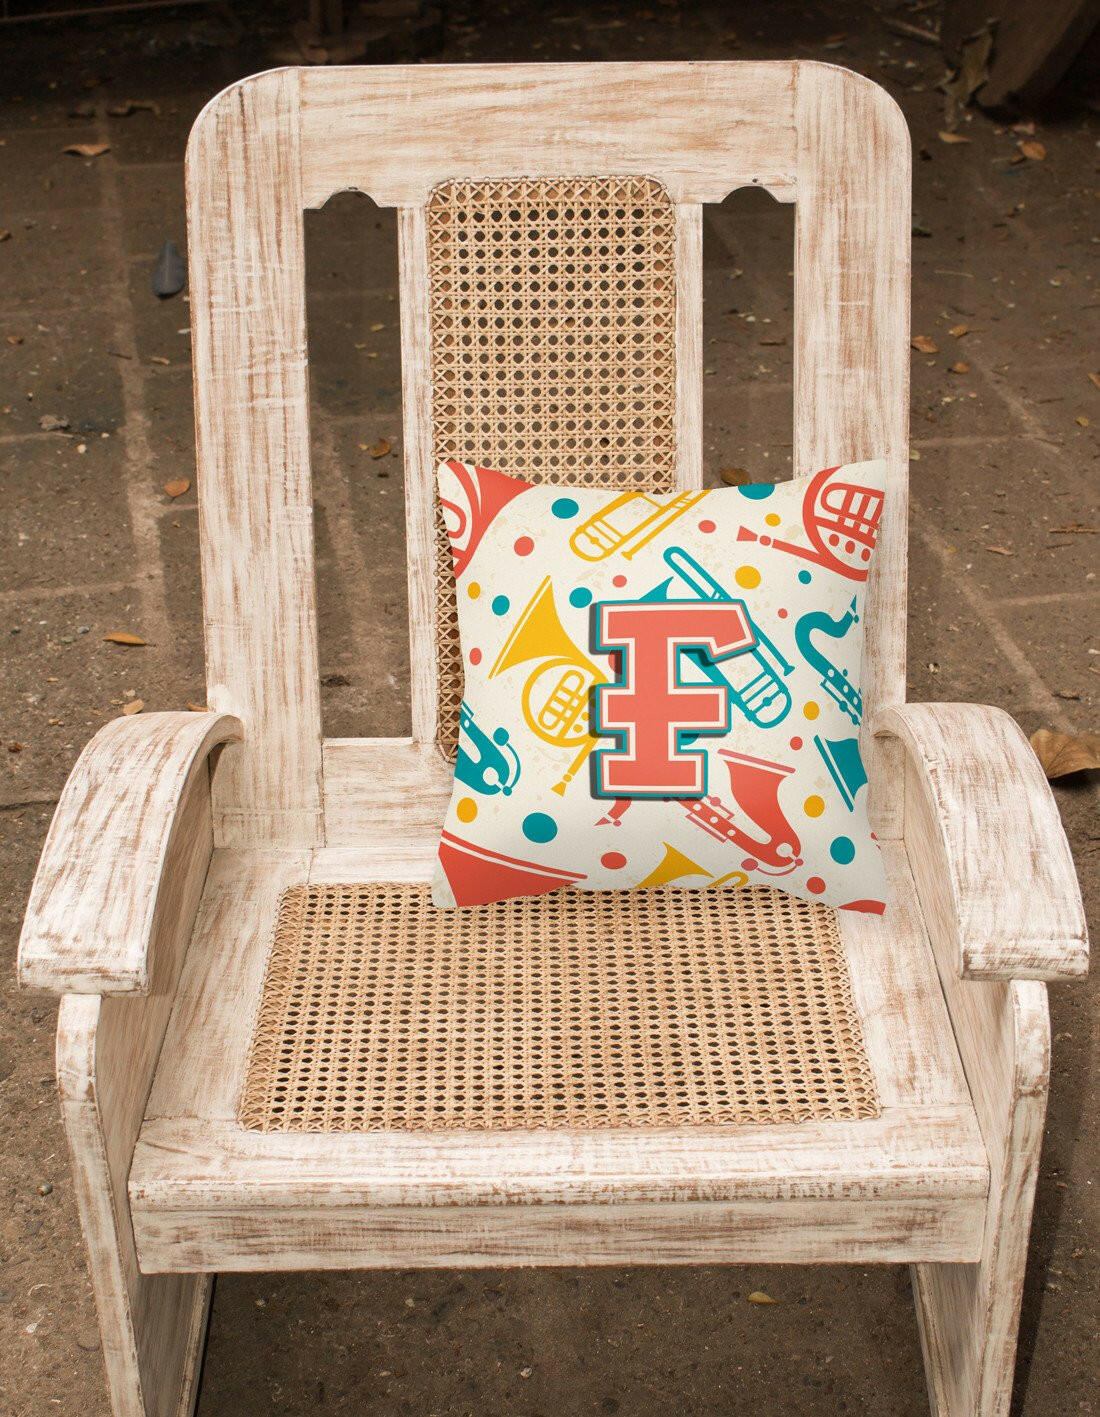 Letter F Retro Teal Orange Musical Instruments Initial Canvas Fabric Decorative Pillow CJ2001-FPW1414 by Caroline's Treasures